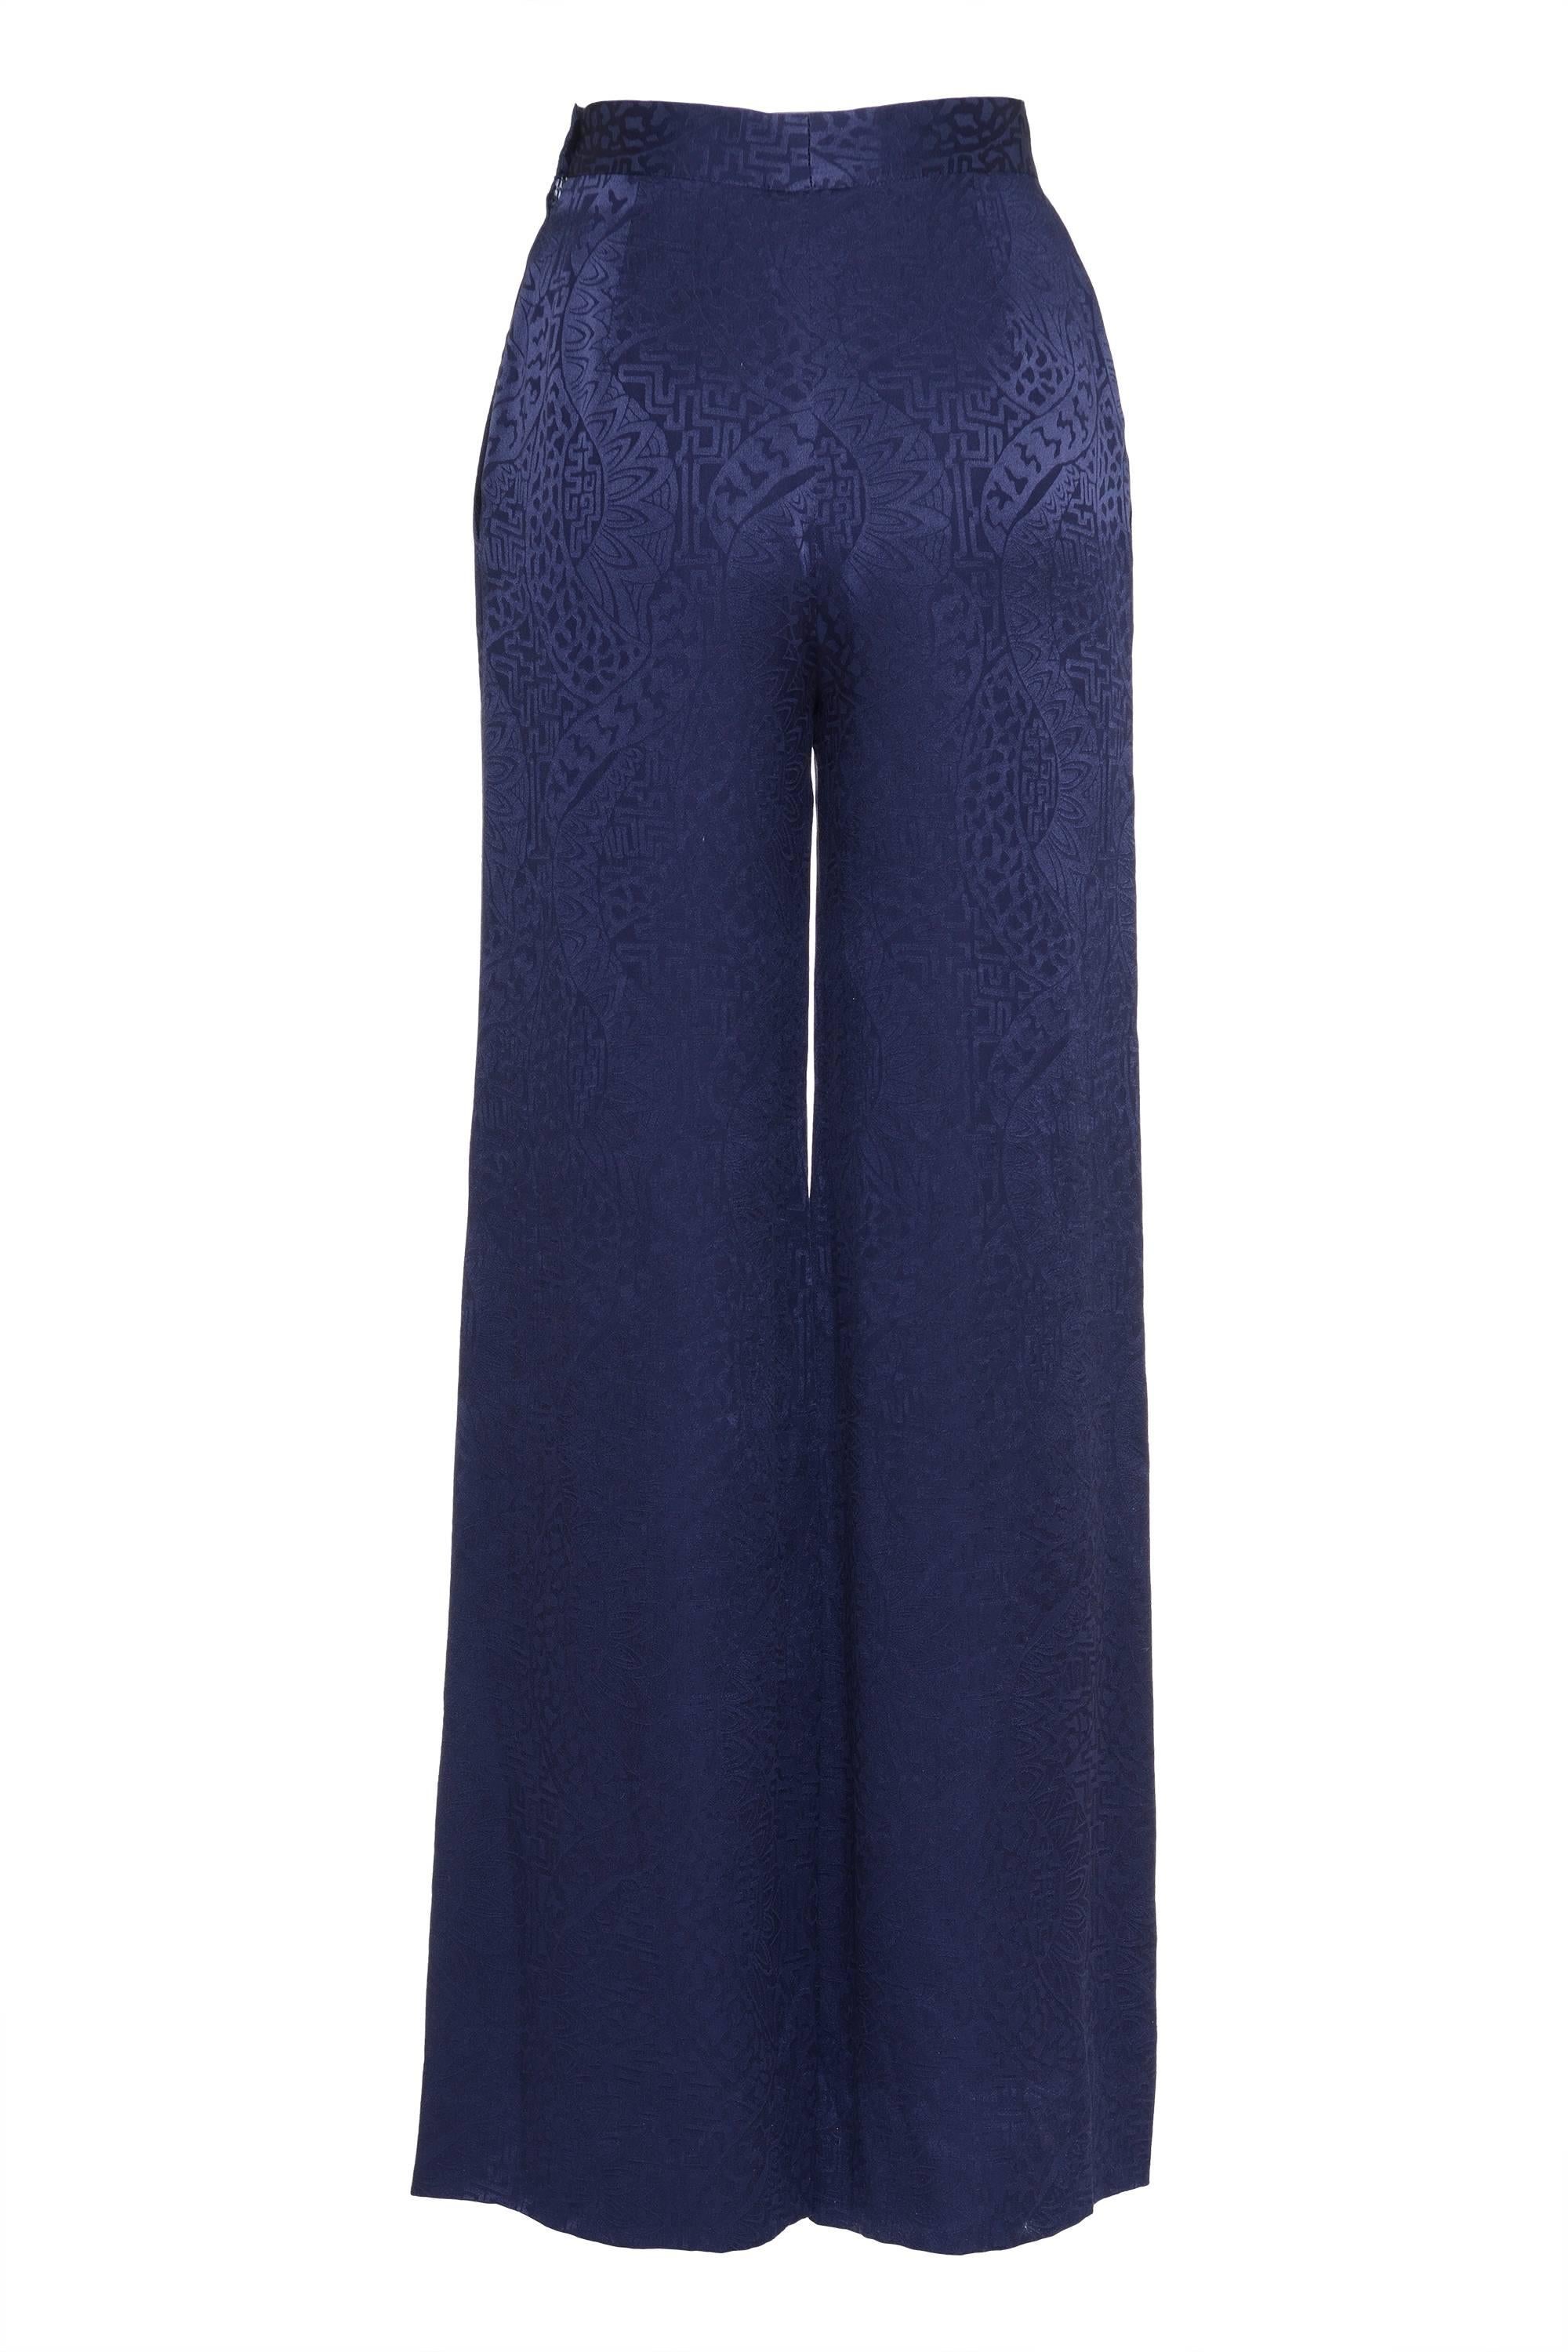 This elegant blue deep bell bottom pants by GIANFRANCO FERRE has two front slant pockets, on each side, two front darts, natural waistline, zip and button side closure. It is fully lined. The textile has a special abstract pattern.
 
Label: